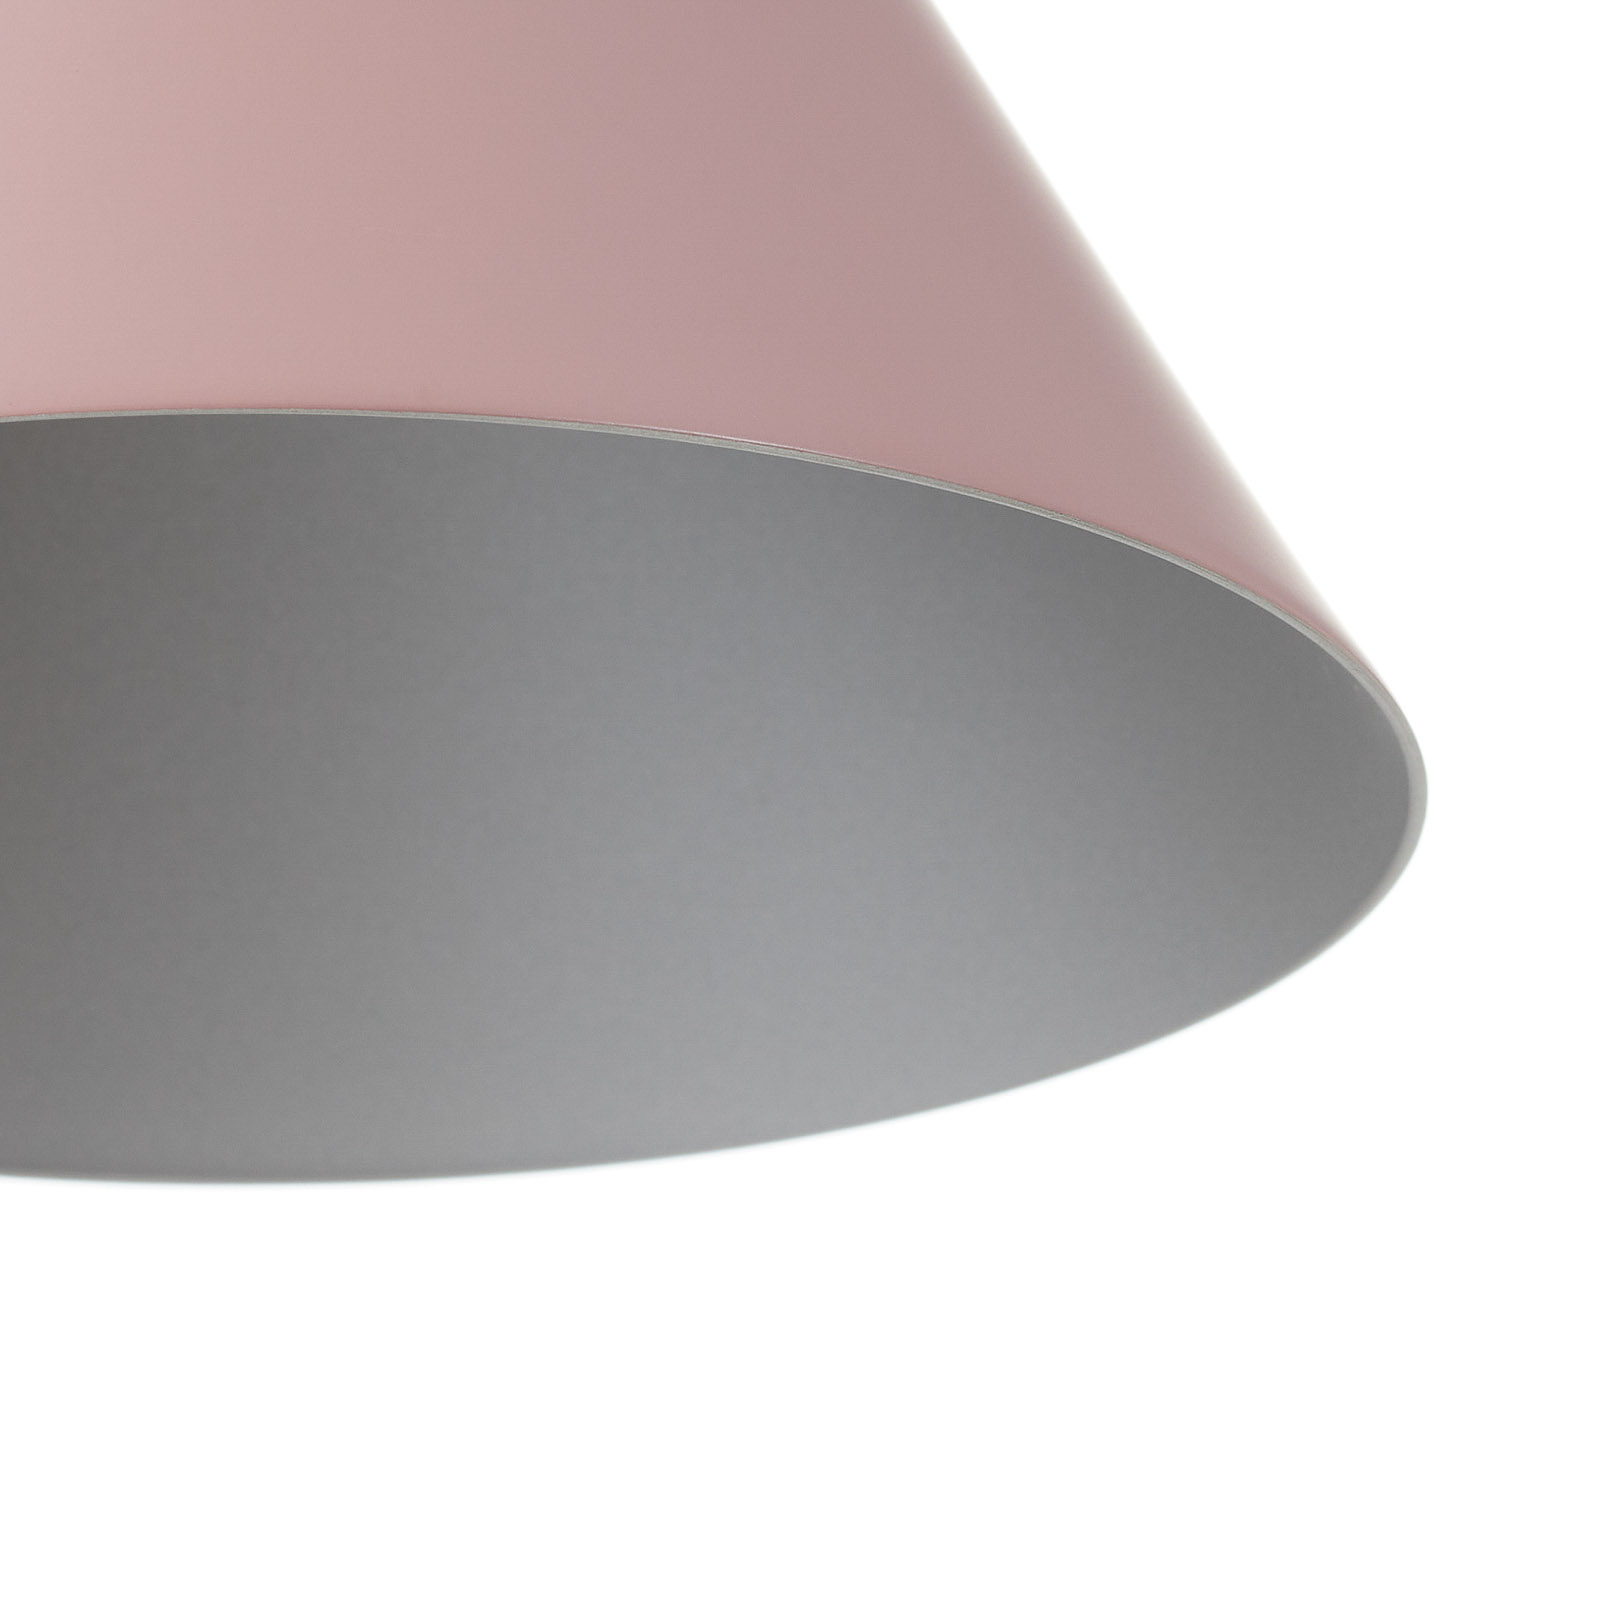 Anglepoise Type 80 hanging light, pink